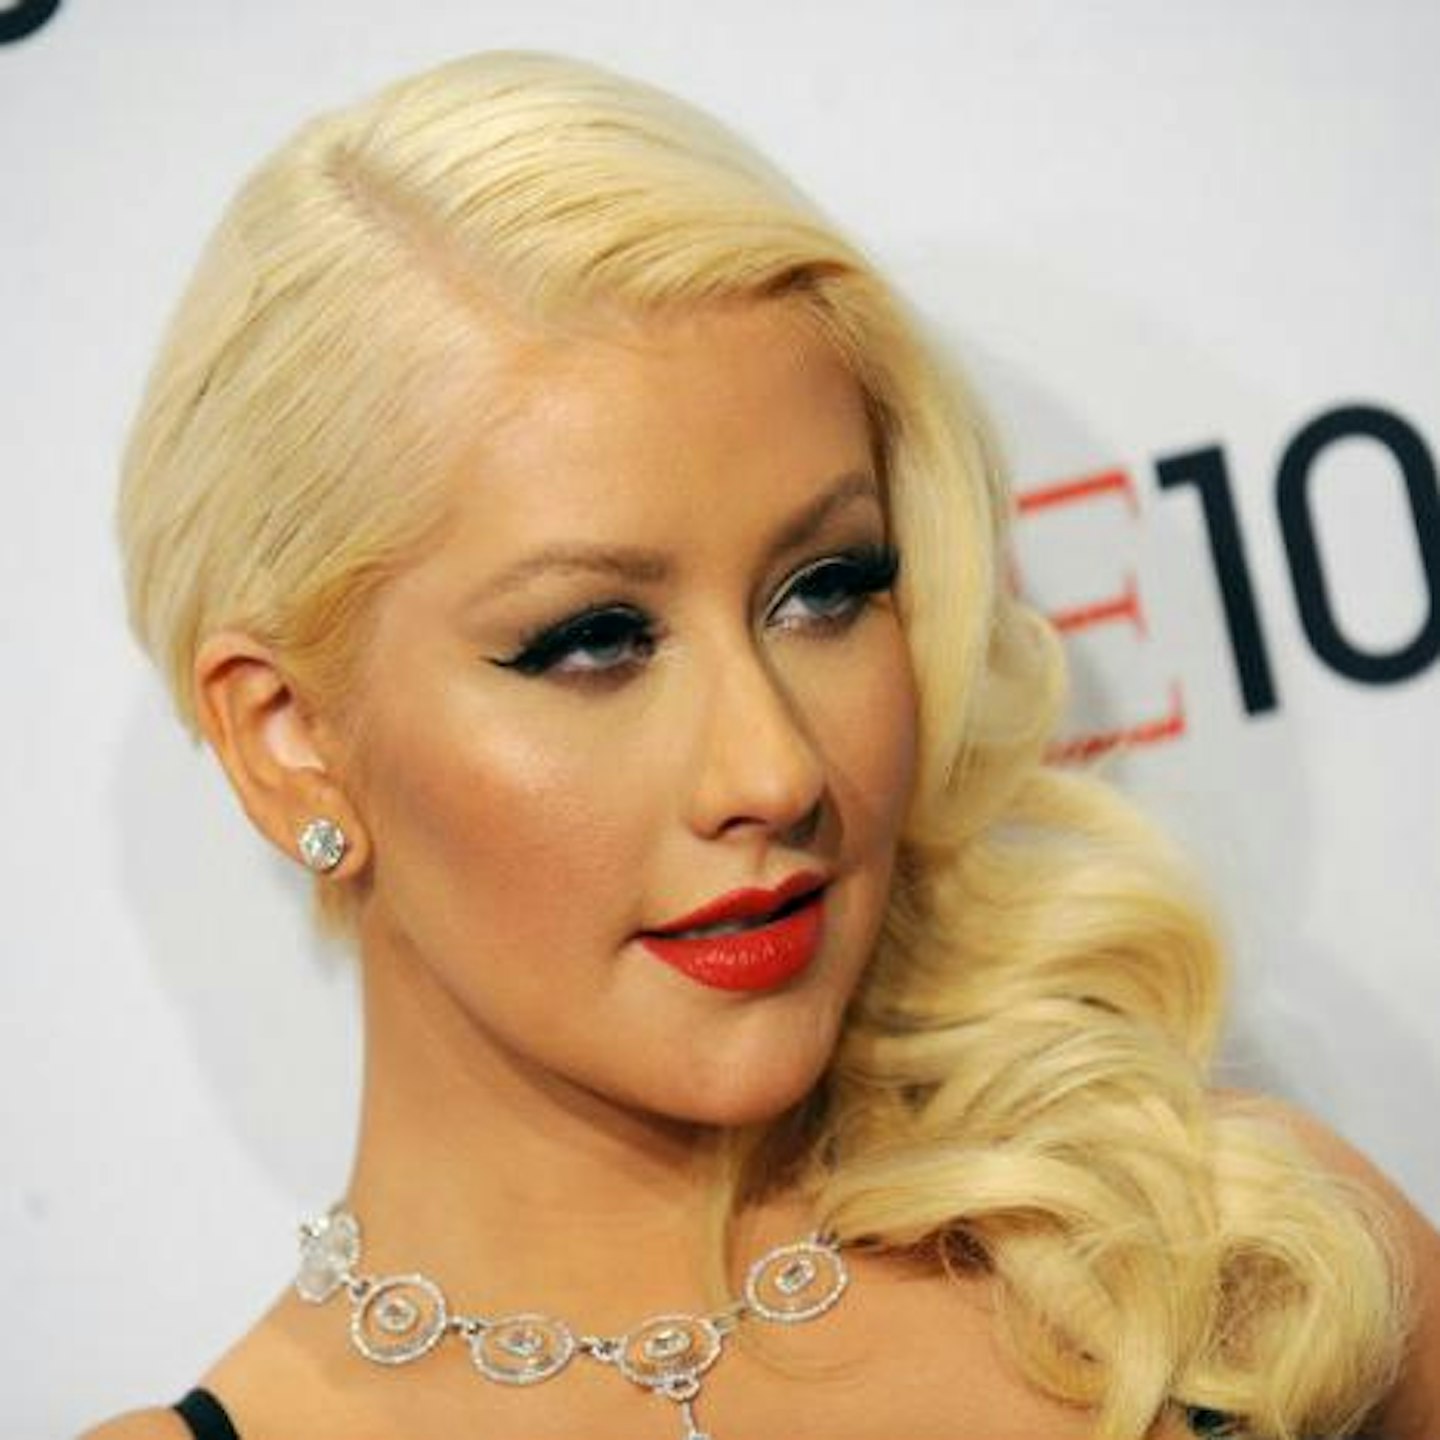 Christina Aguilera allegedly insists on non-evian water in her dressing room.